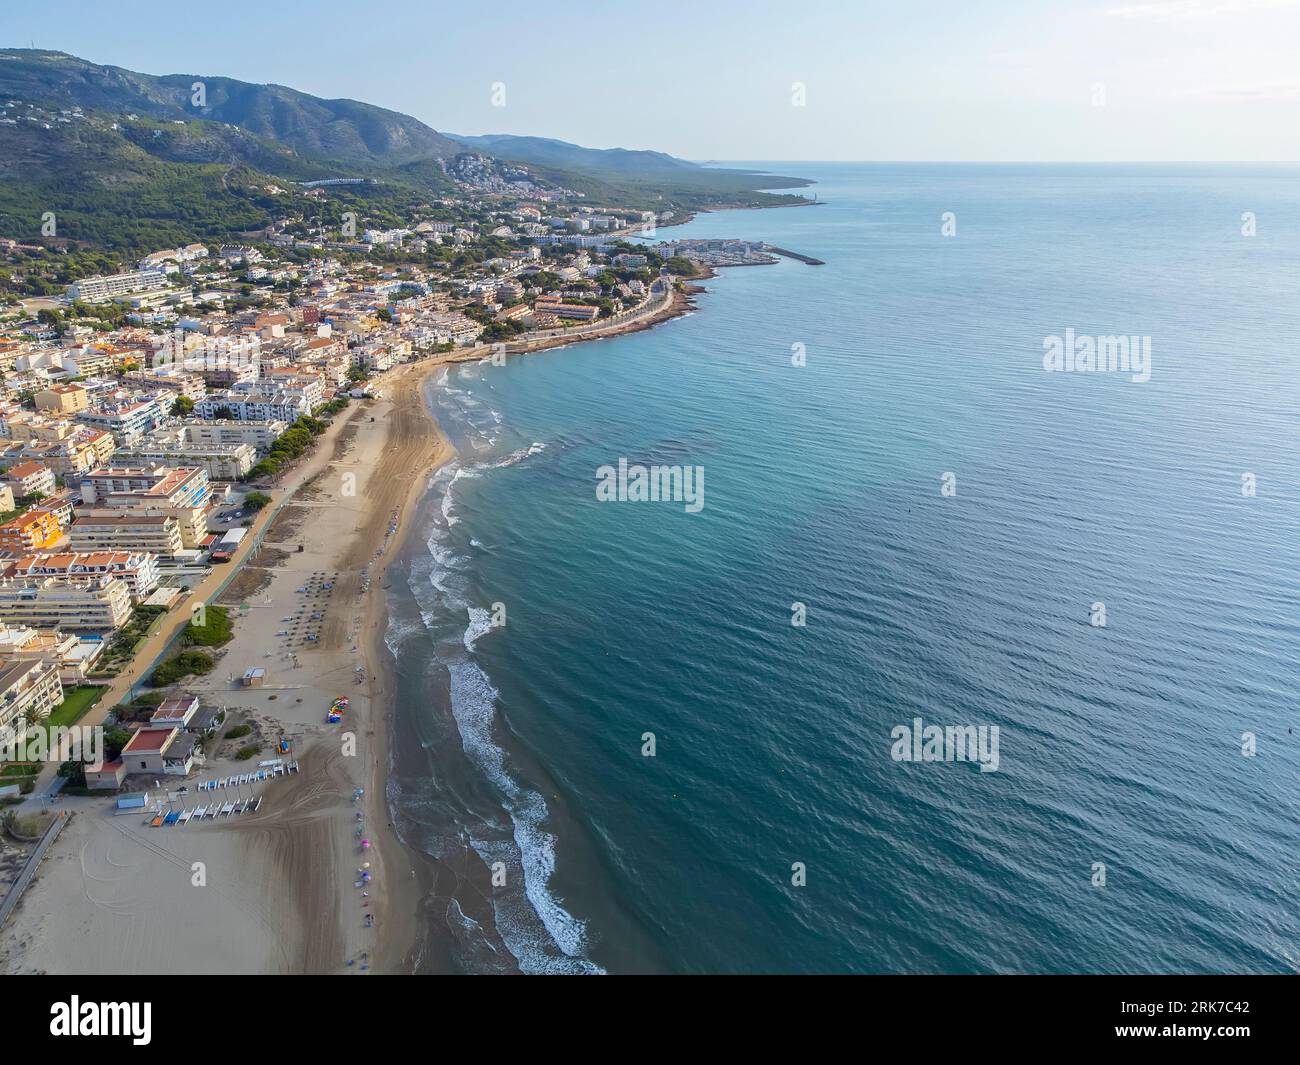 aerial image of the beach of El Cargador in Alcober with the Sierra de Irta Natural Park in the background, drone view, horizontal Stock Photo